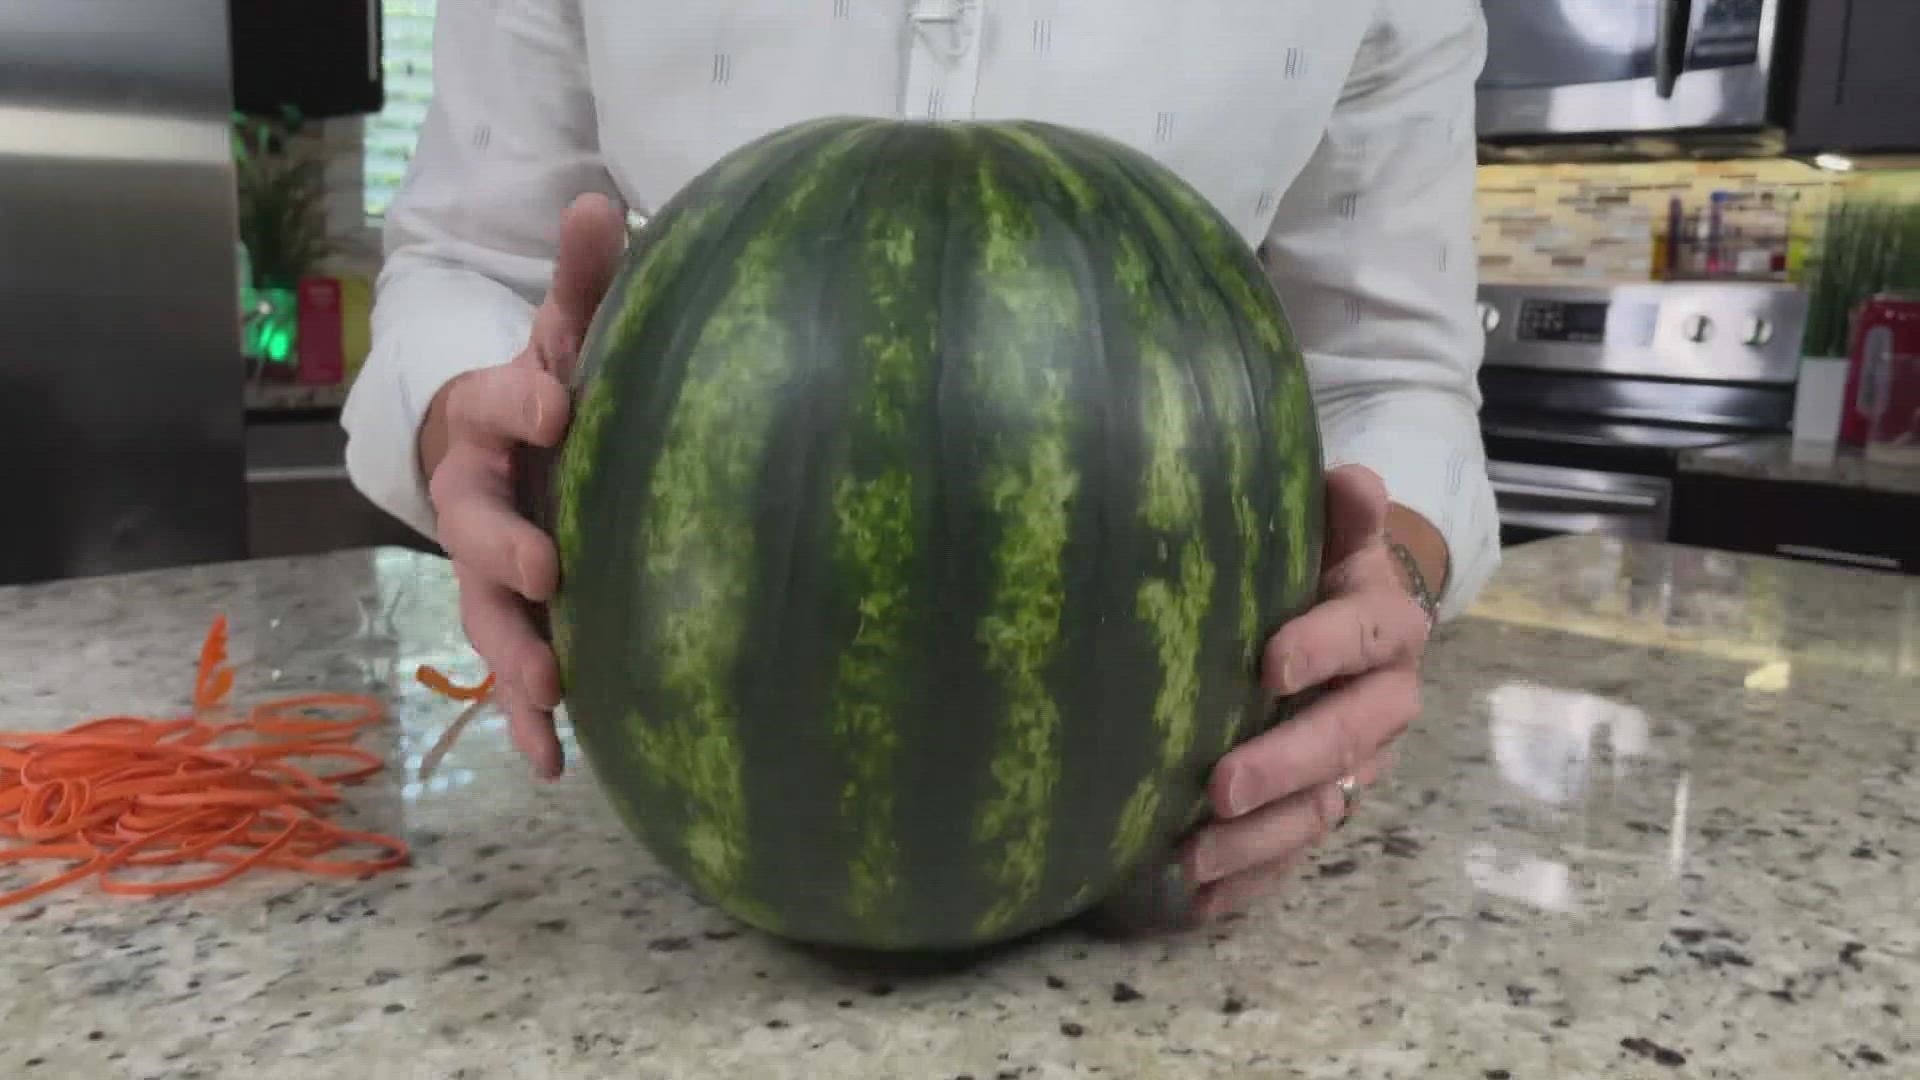 Is there a science to cutting up a watermelon?